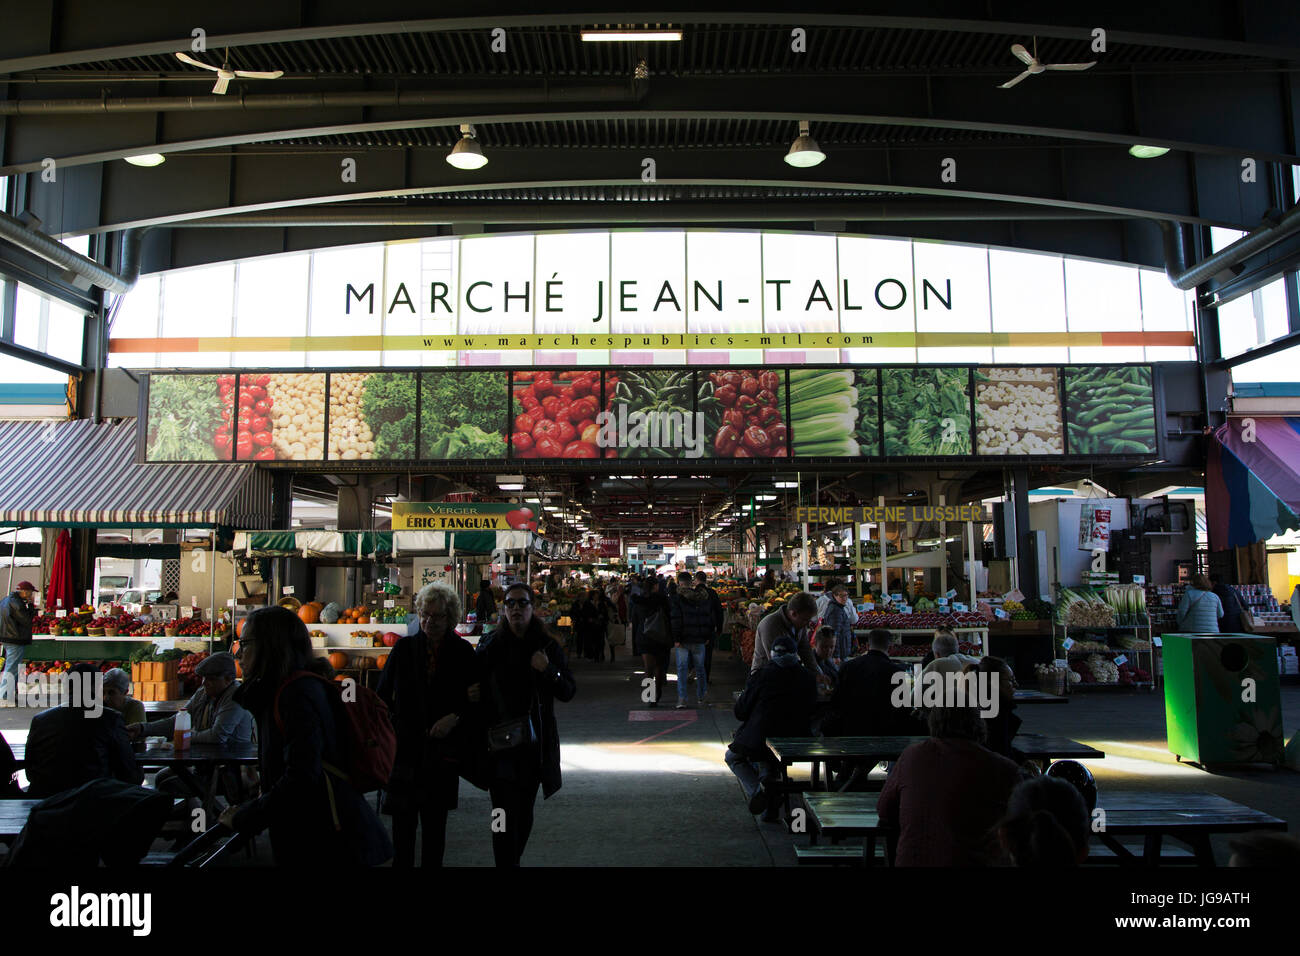 Jean-Talon Market in the Little Italy district of Montreal, Canada. The public market opened in 1933 as the Marché du Nord or North-End Market. Stock Photo